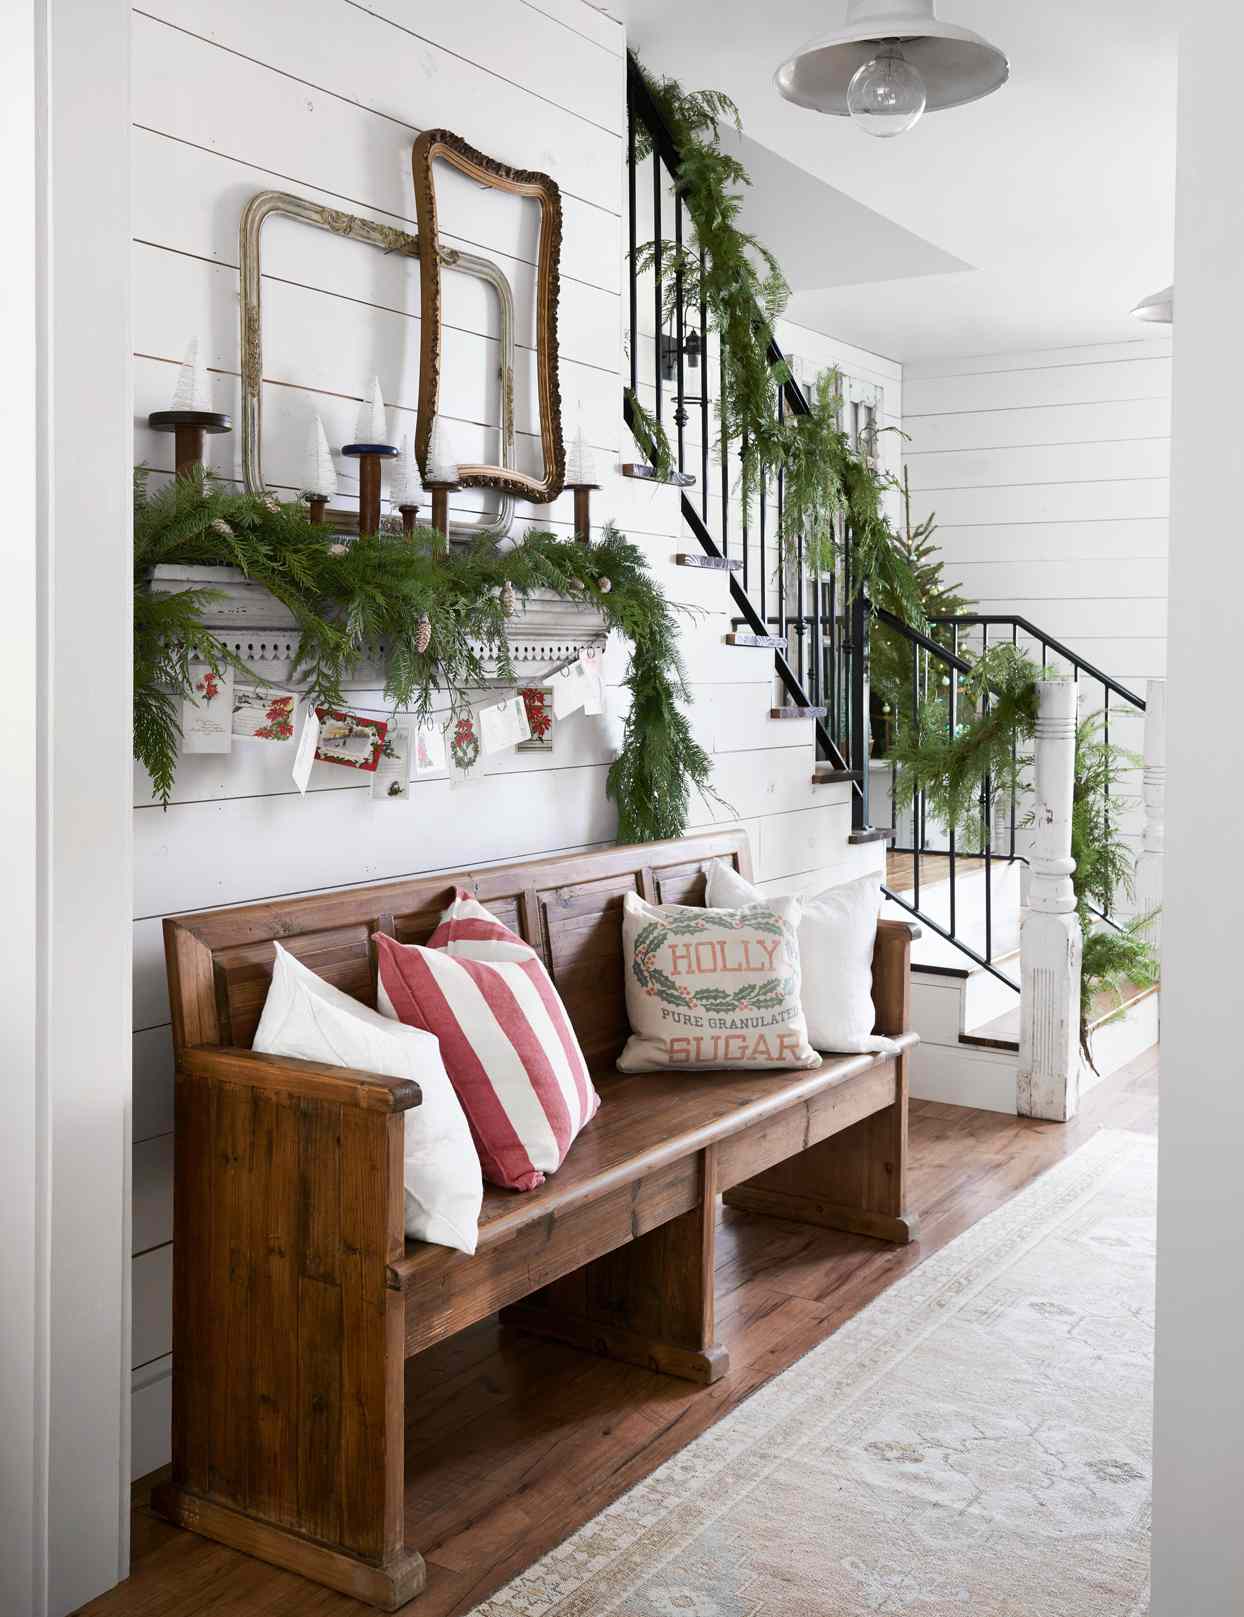 garland covered staircase above wooden bench